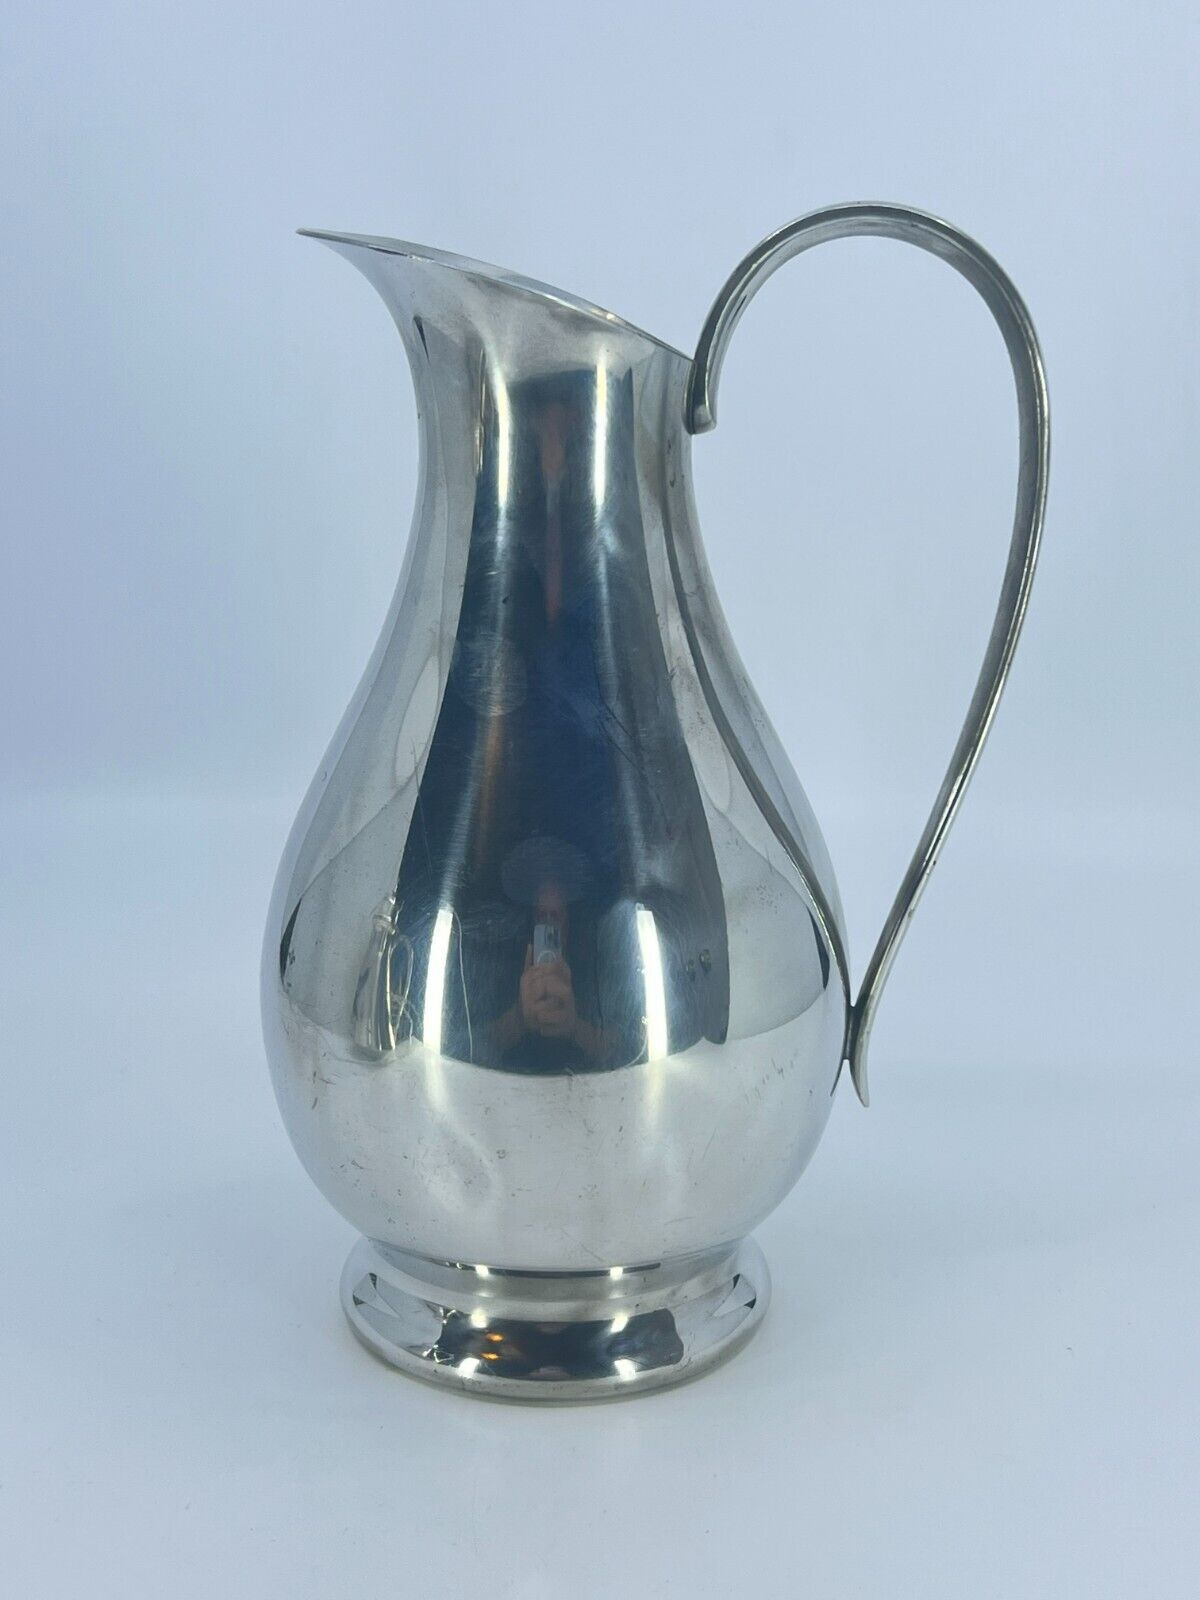 Vintage Mid Century Royal Holland Pitcher - hand numbered 91-46-1745